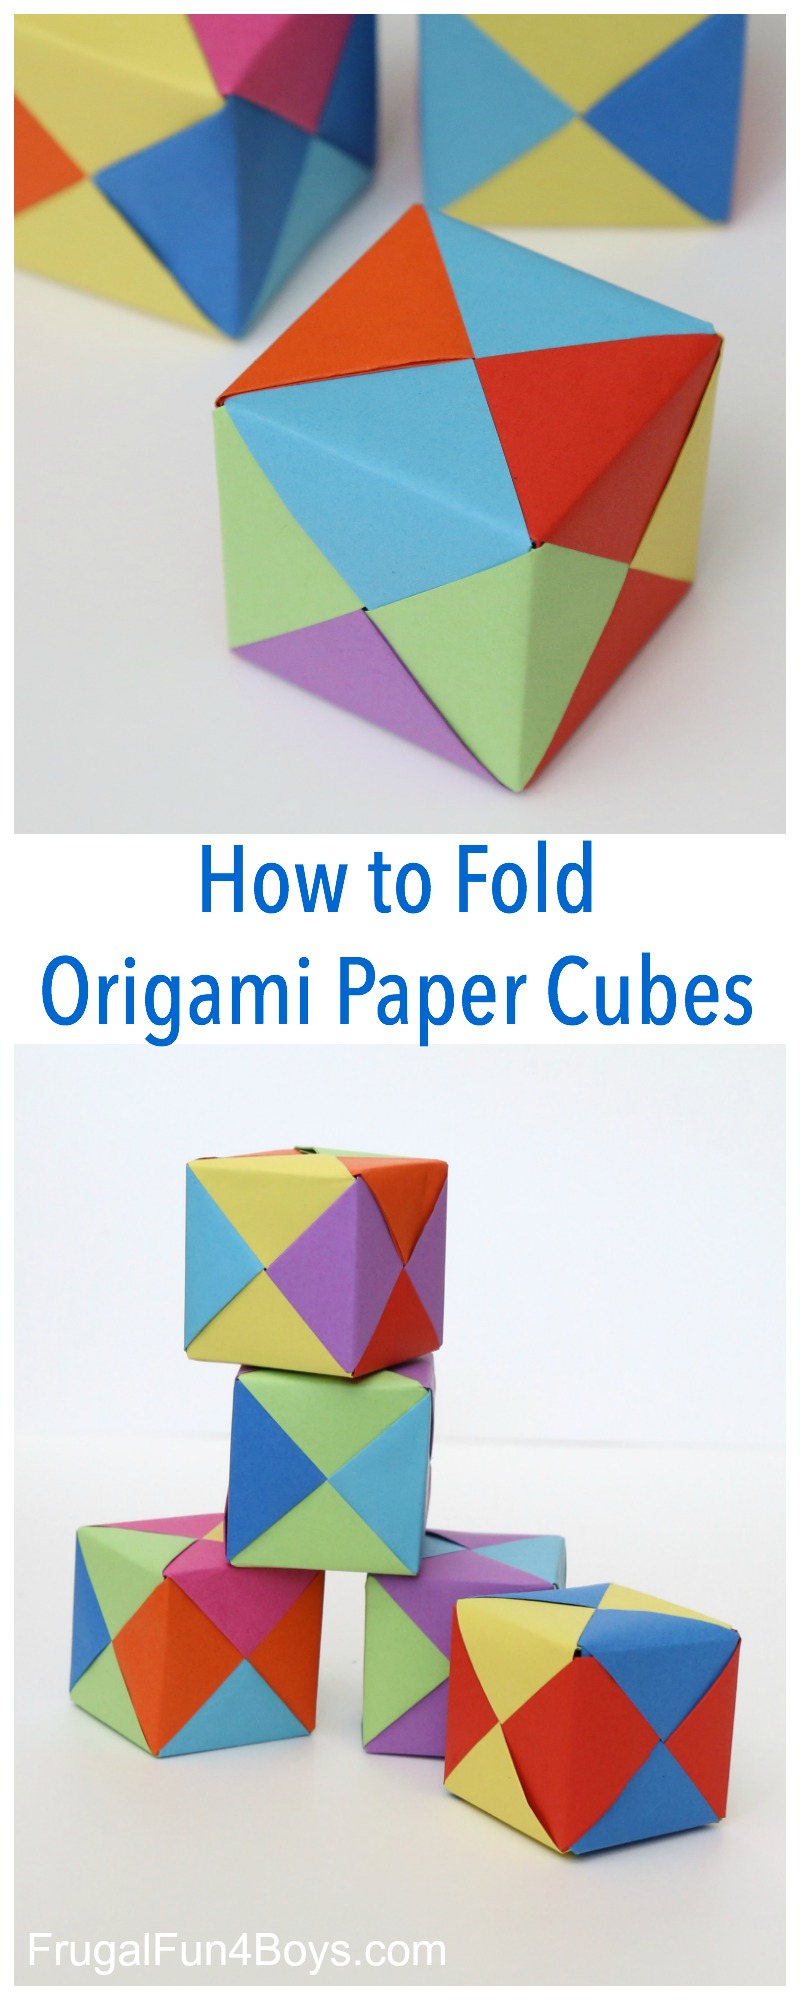 Origami Lantern Ball Instructions How To Fold Origami Paper Cubes Frugal Fun For Boys And Girls